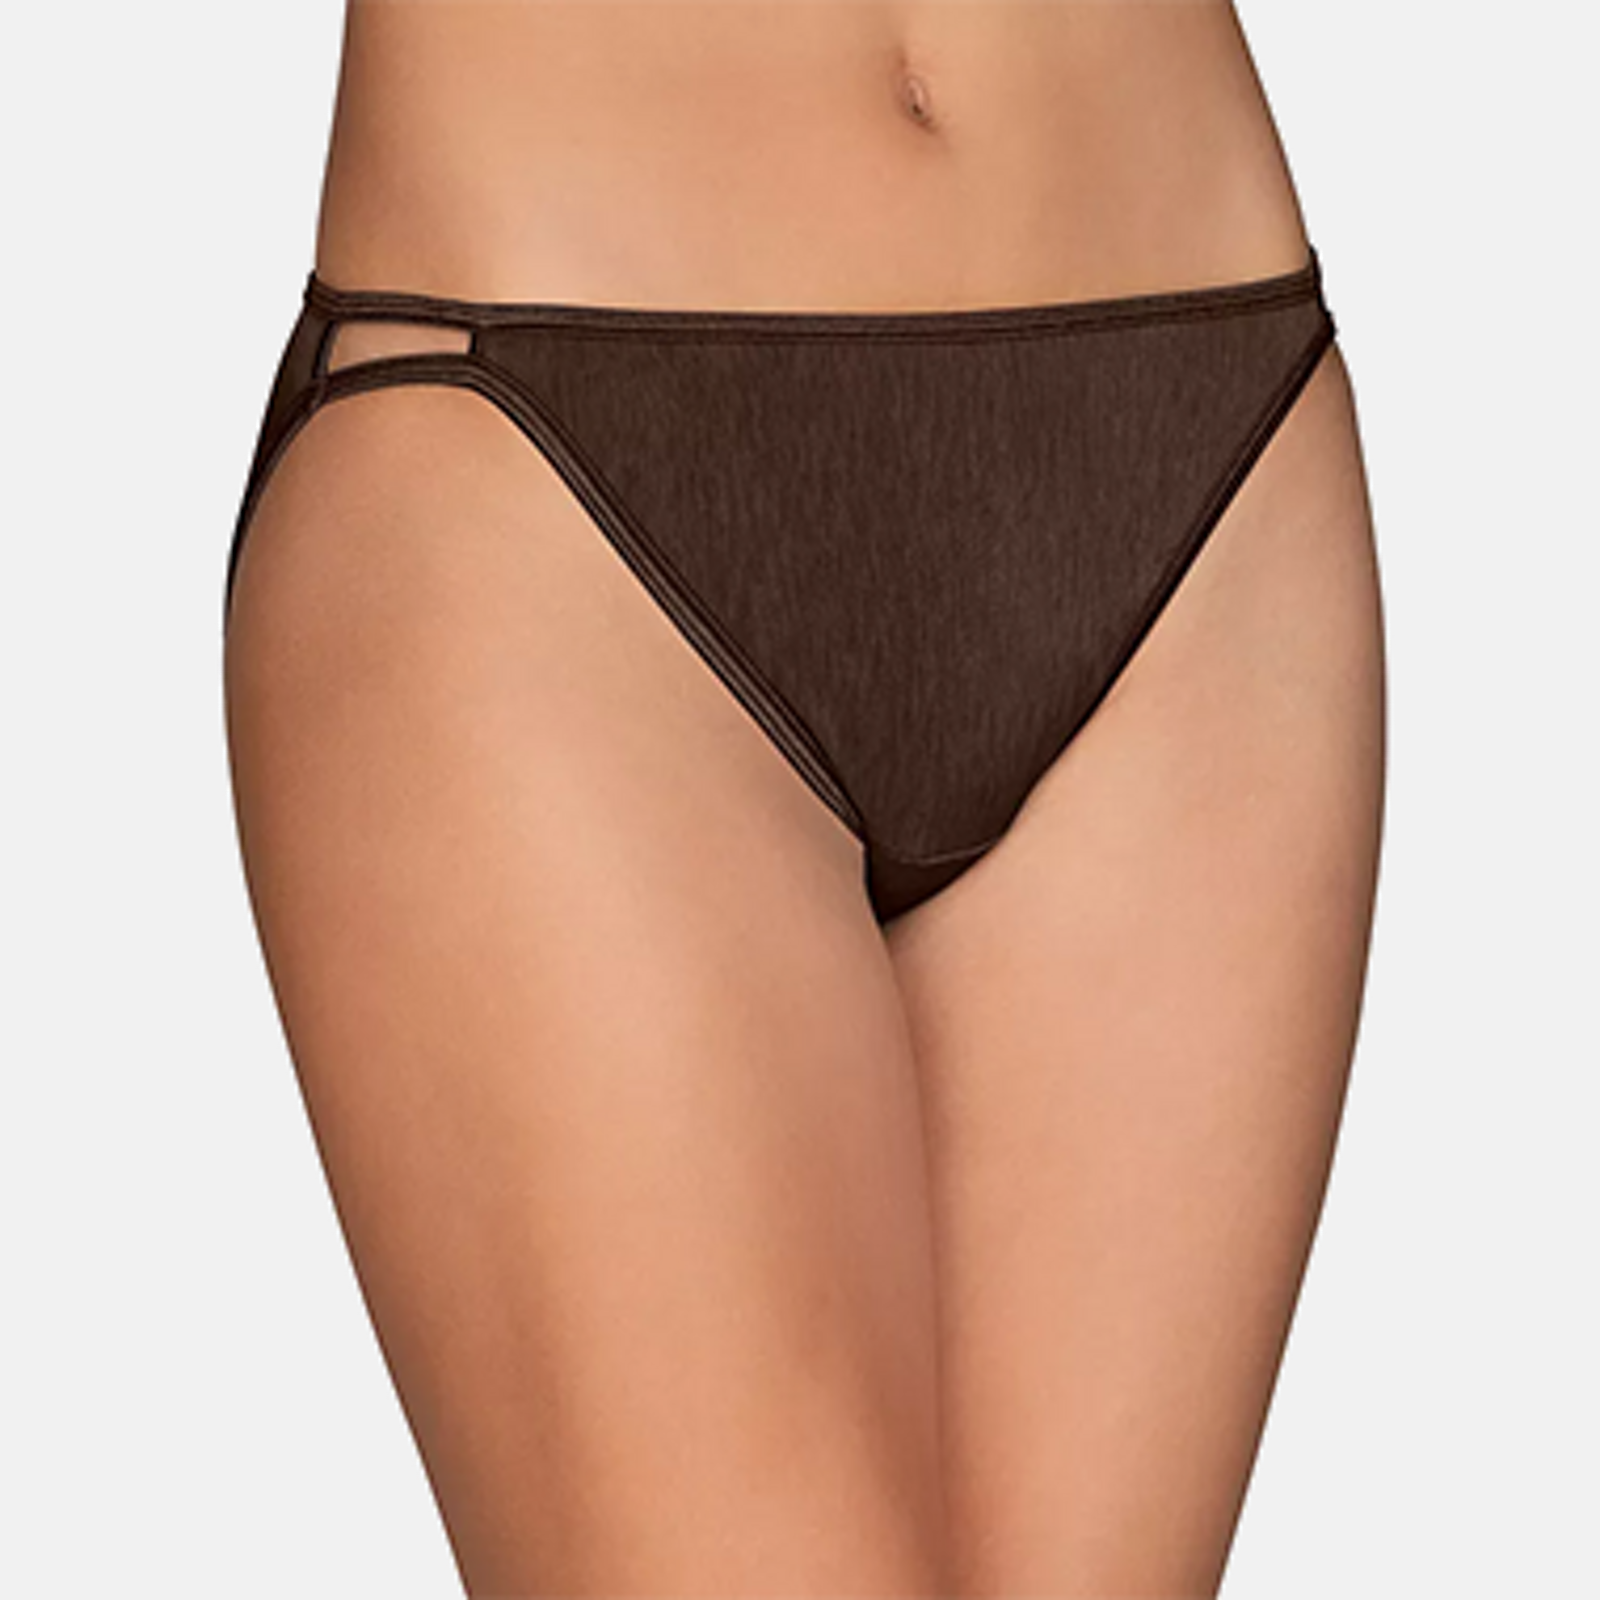 Lively Underwear Shop All Lingerie - Macy's